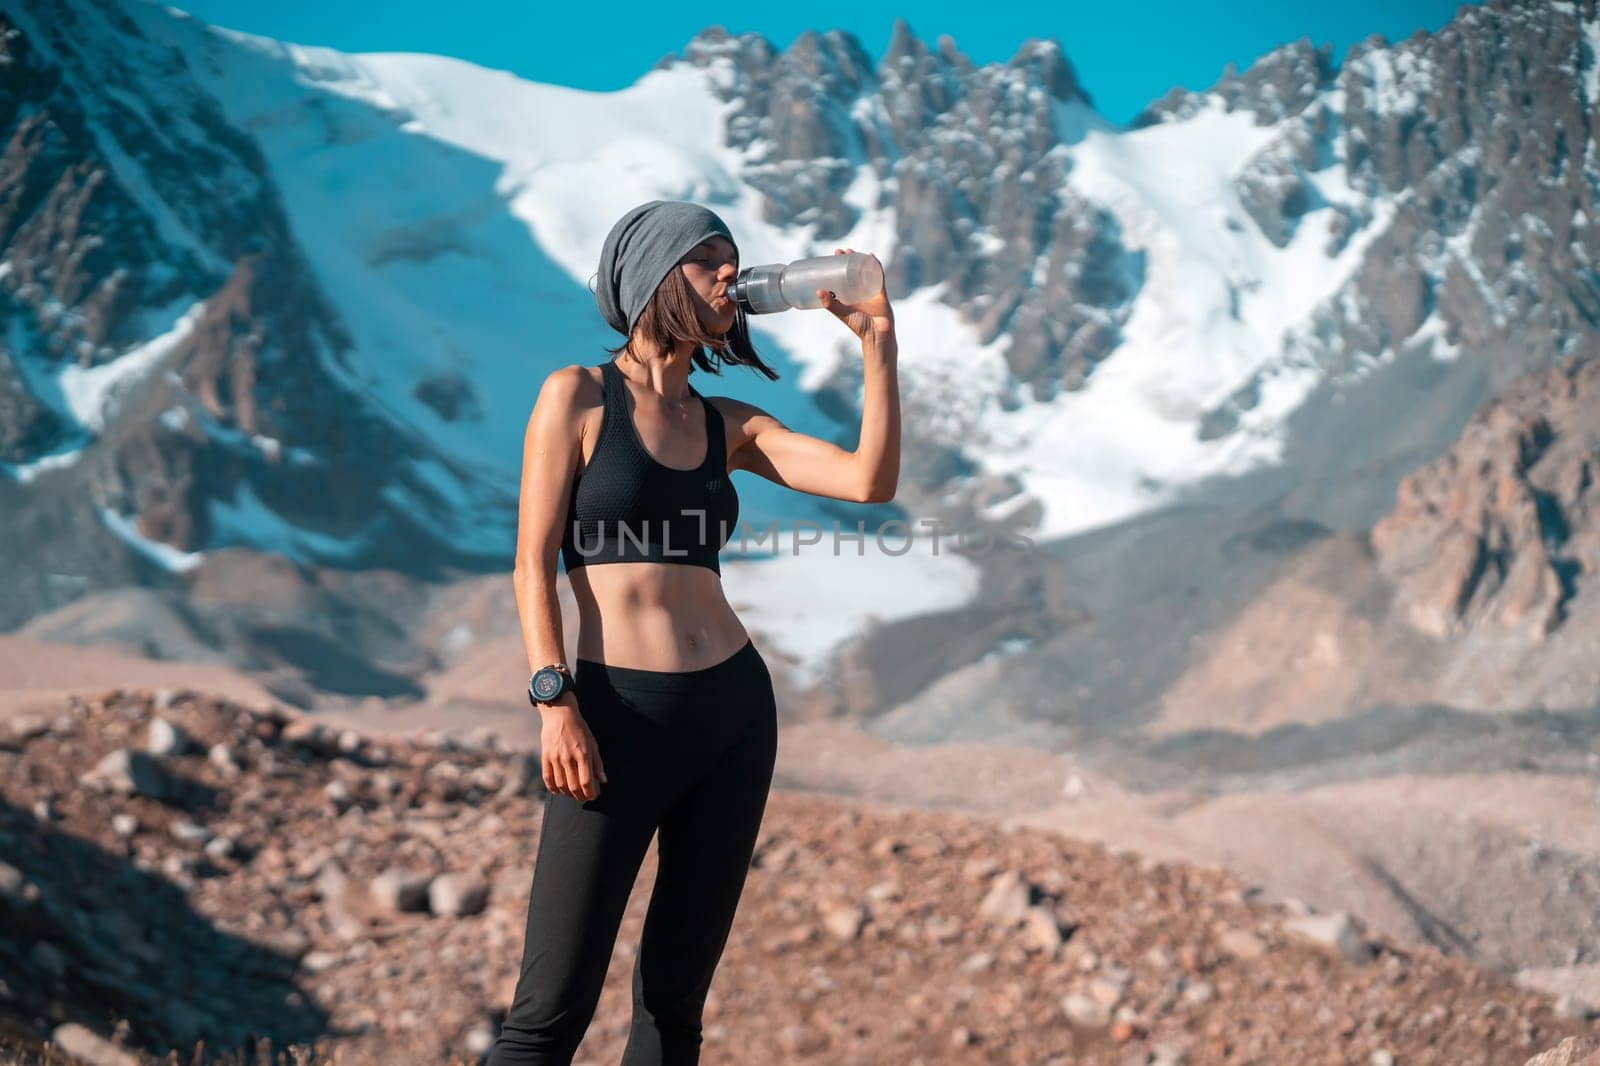 A young girl of athletic build drinks water, isotonic from a bottle during training on trail running in the snow-capped mountains. Runner is making workout outdoor.